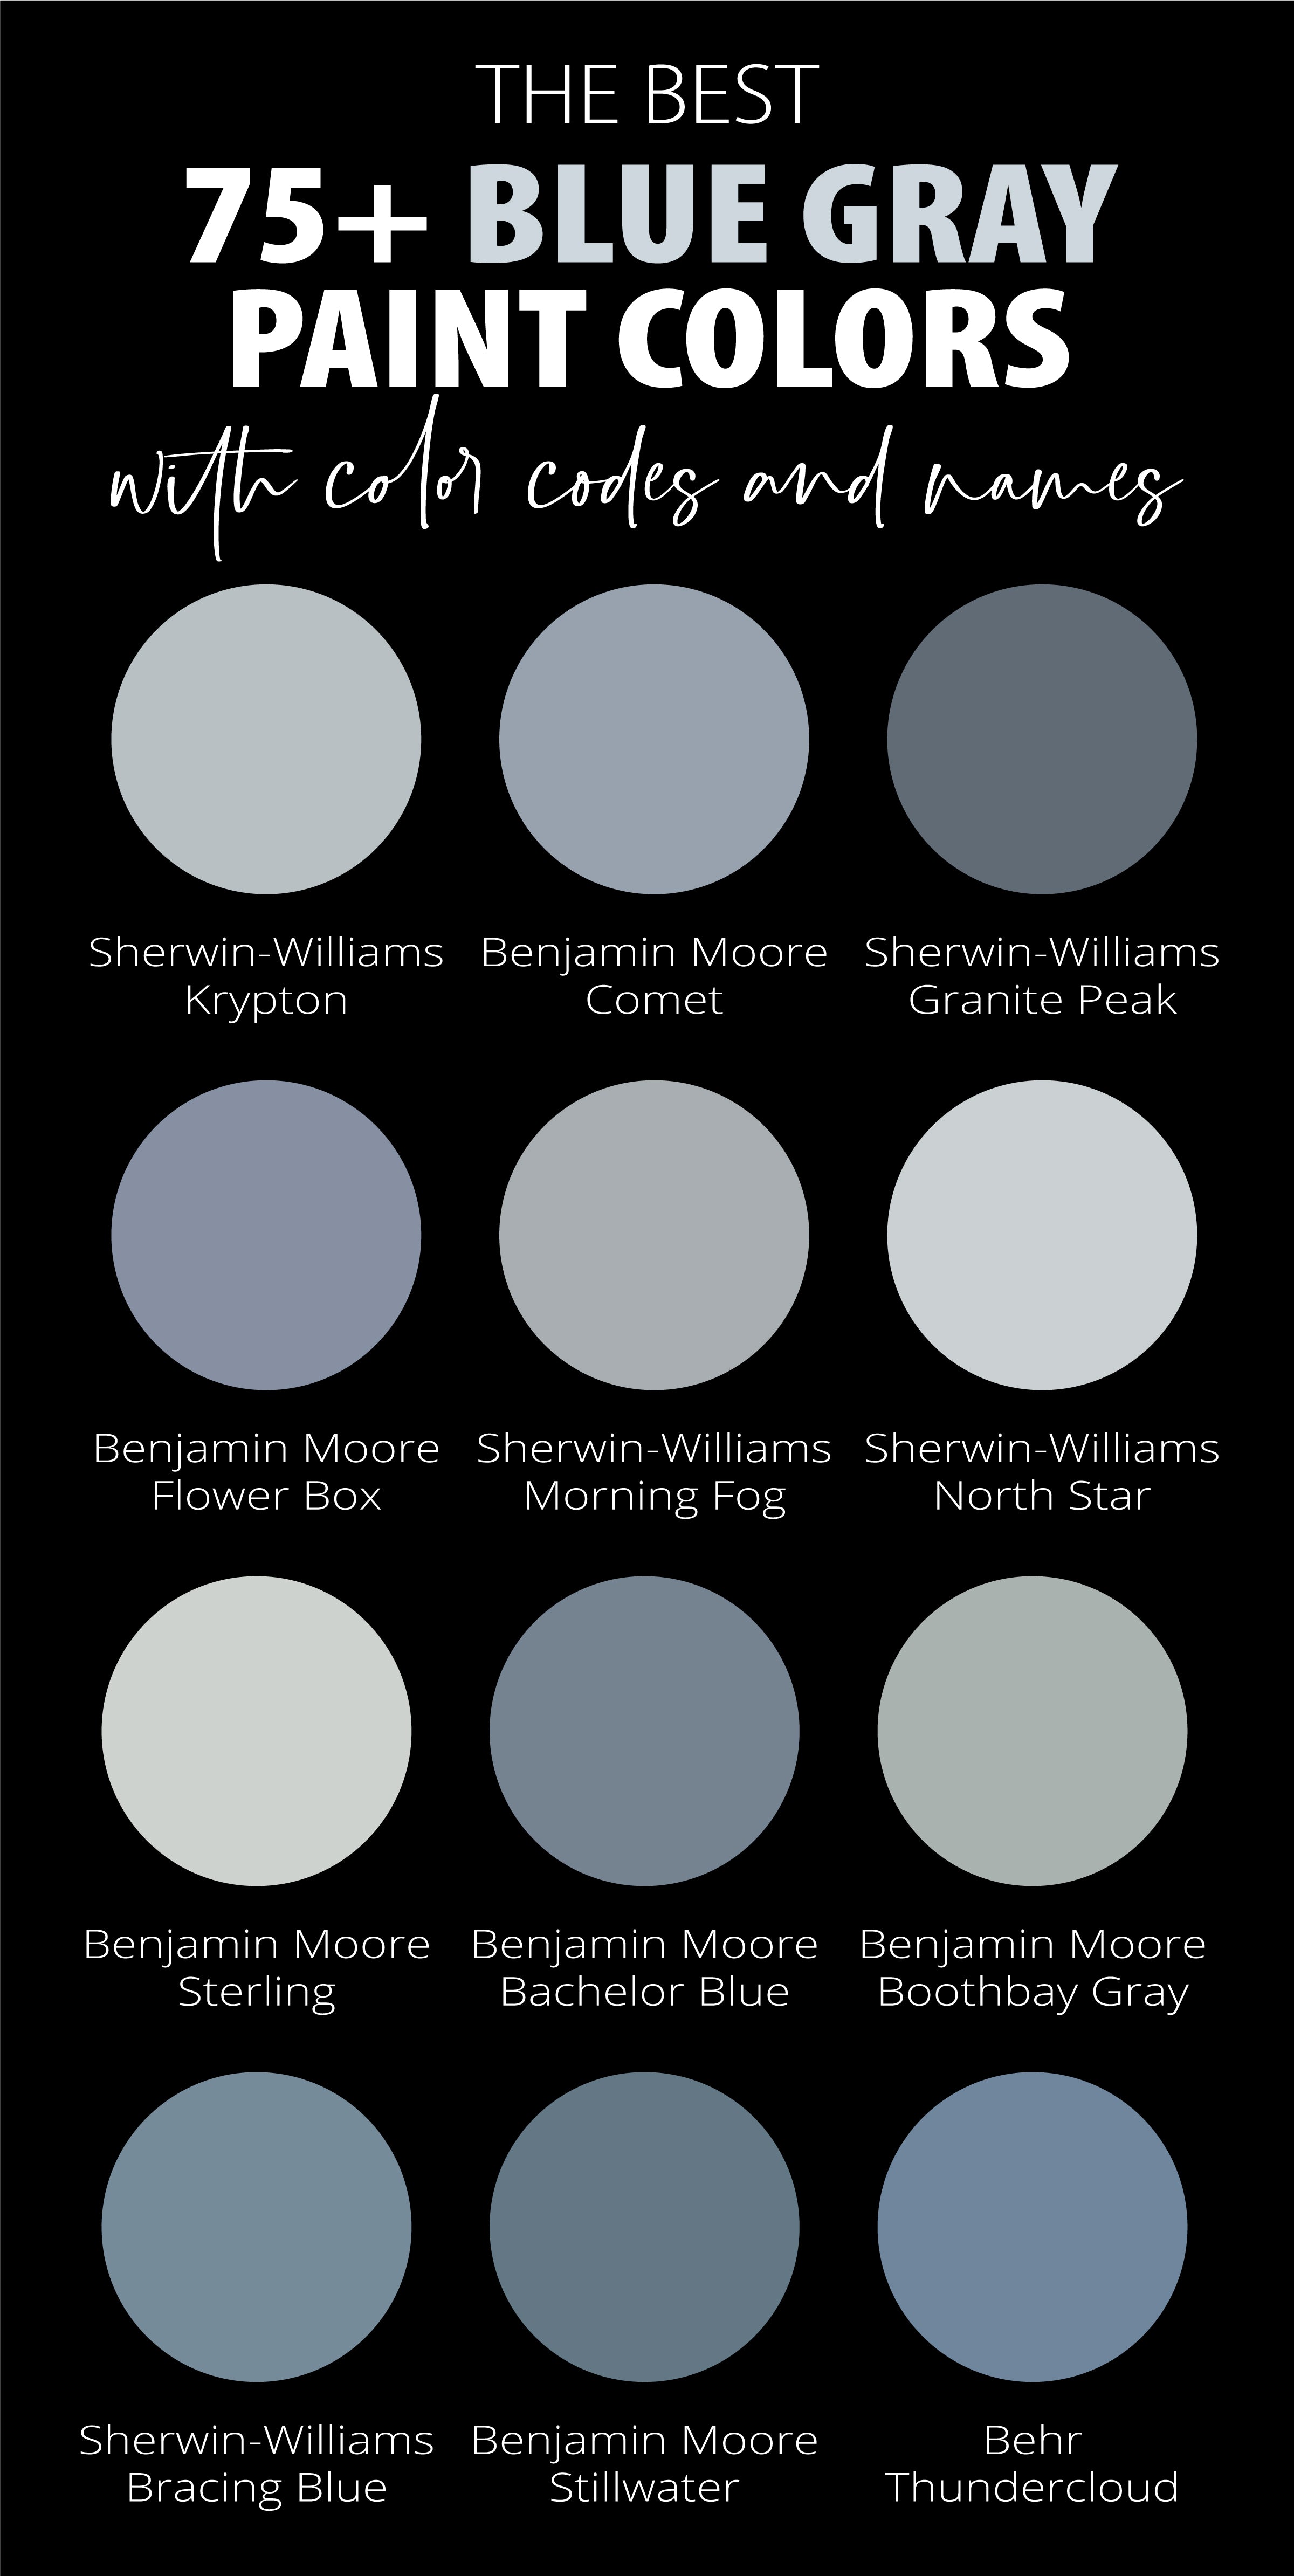 Best-Blue-Gray-Paint-Colors-with-Names-Pinterest-Tall-Black-Background